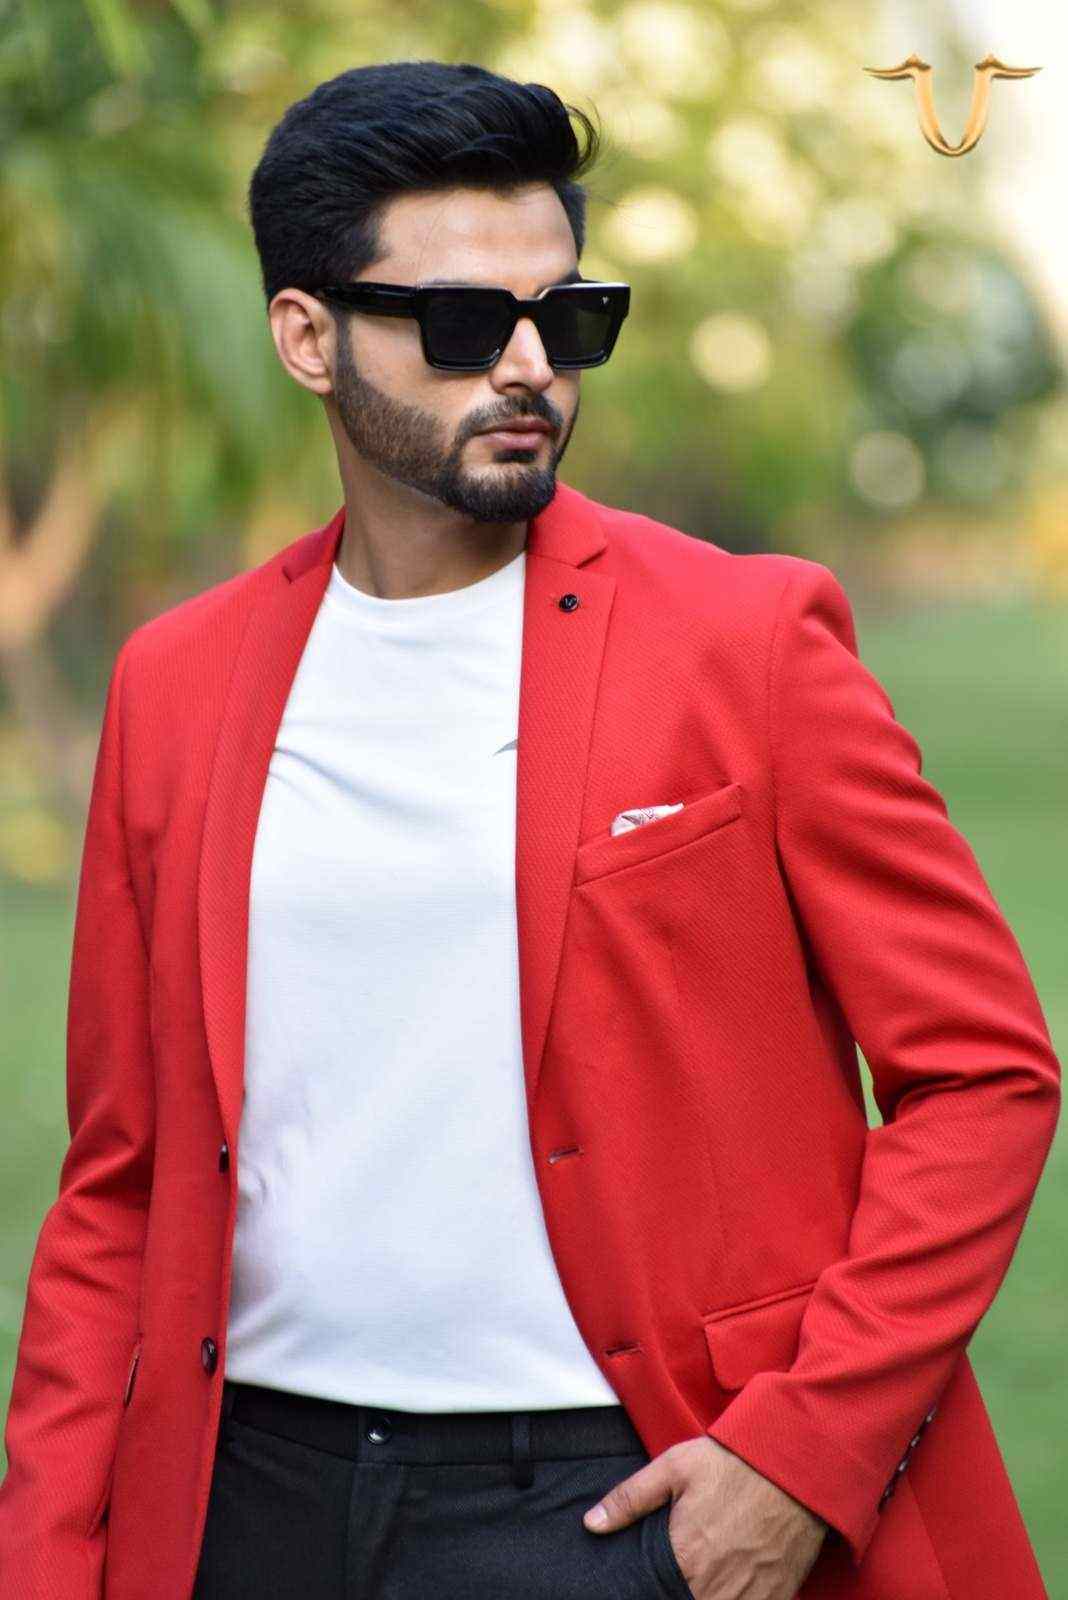 A fashion-forward red blazer that is perfect for making a statement. The blazer is made from a high-quality, printed fabric and has a flattering, contemporary fit.